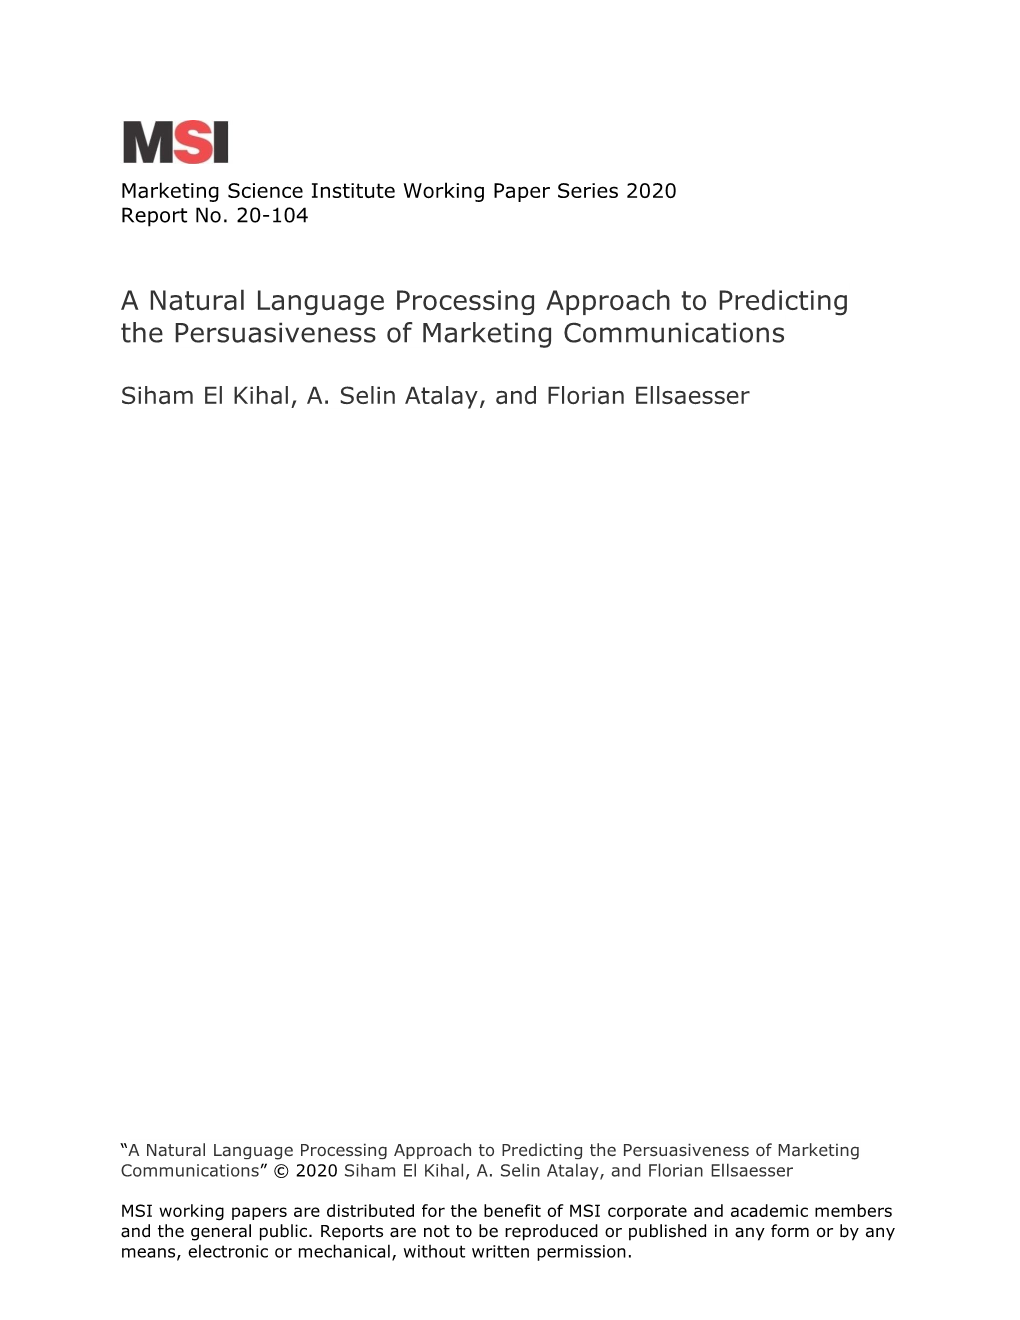 A Natural Language Processing Approach to Predicting the Persuasiveness of Marketing Communications